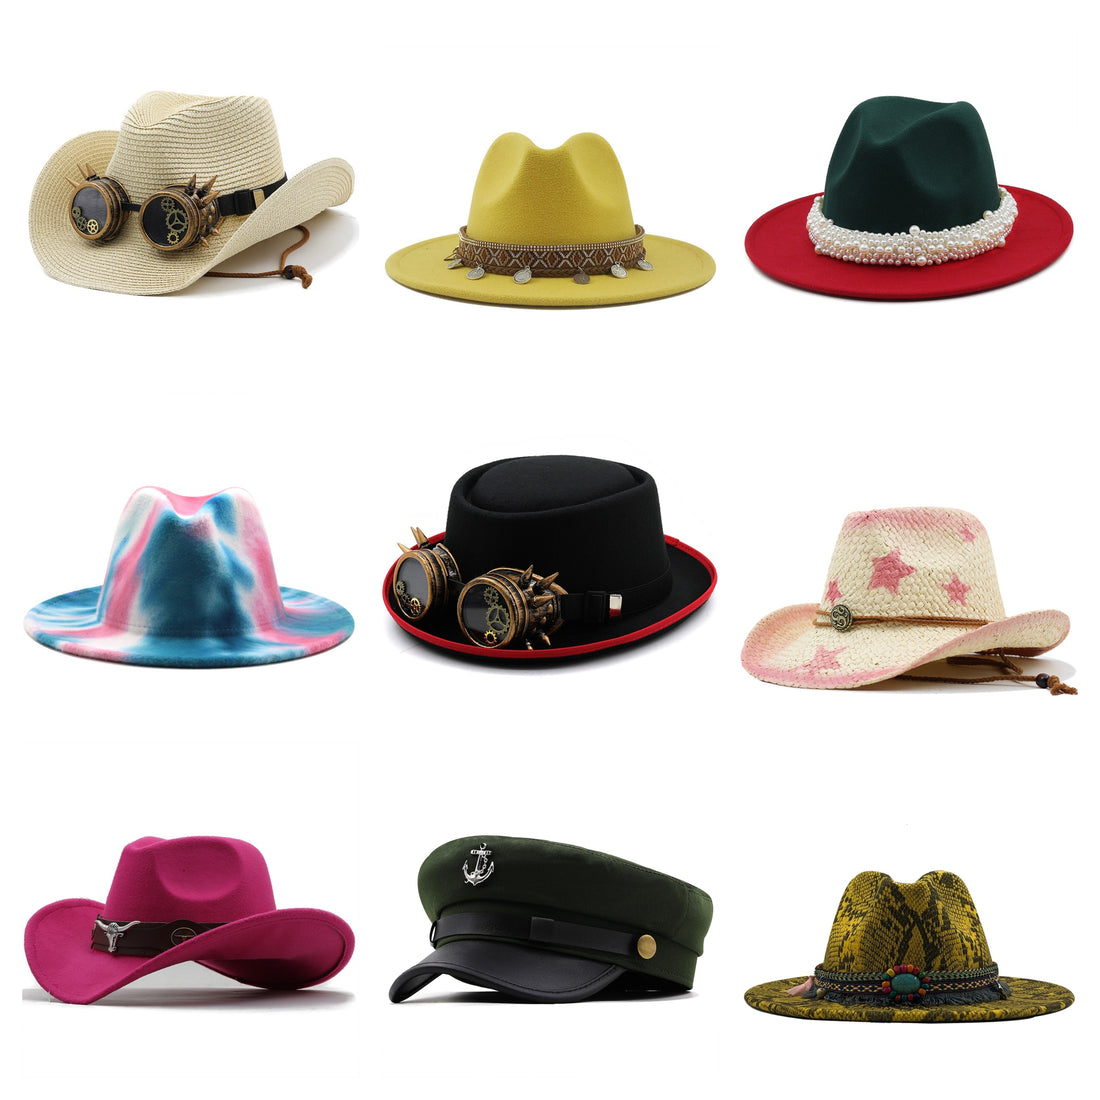 "Hat-titude Matters: Express Yourself with Swag+Chic's Hat Selection"